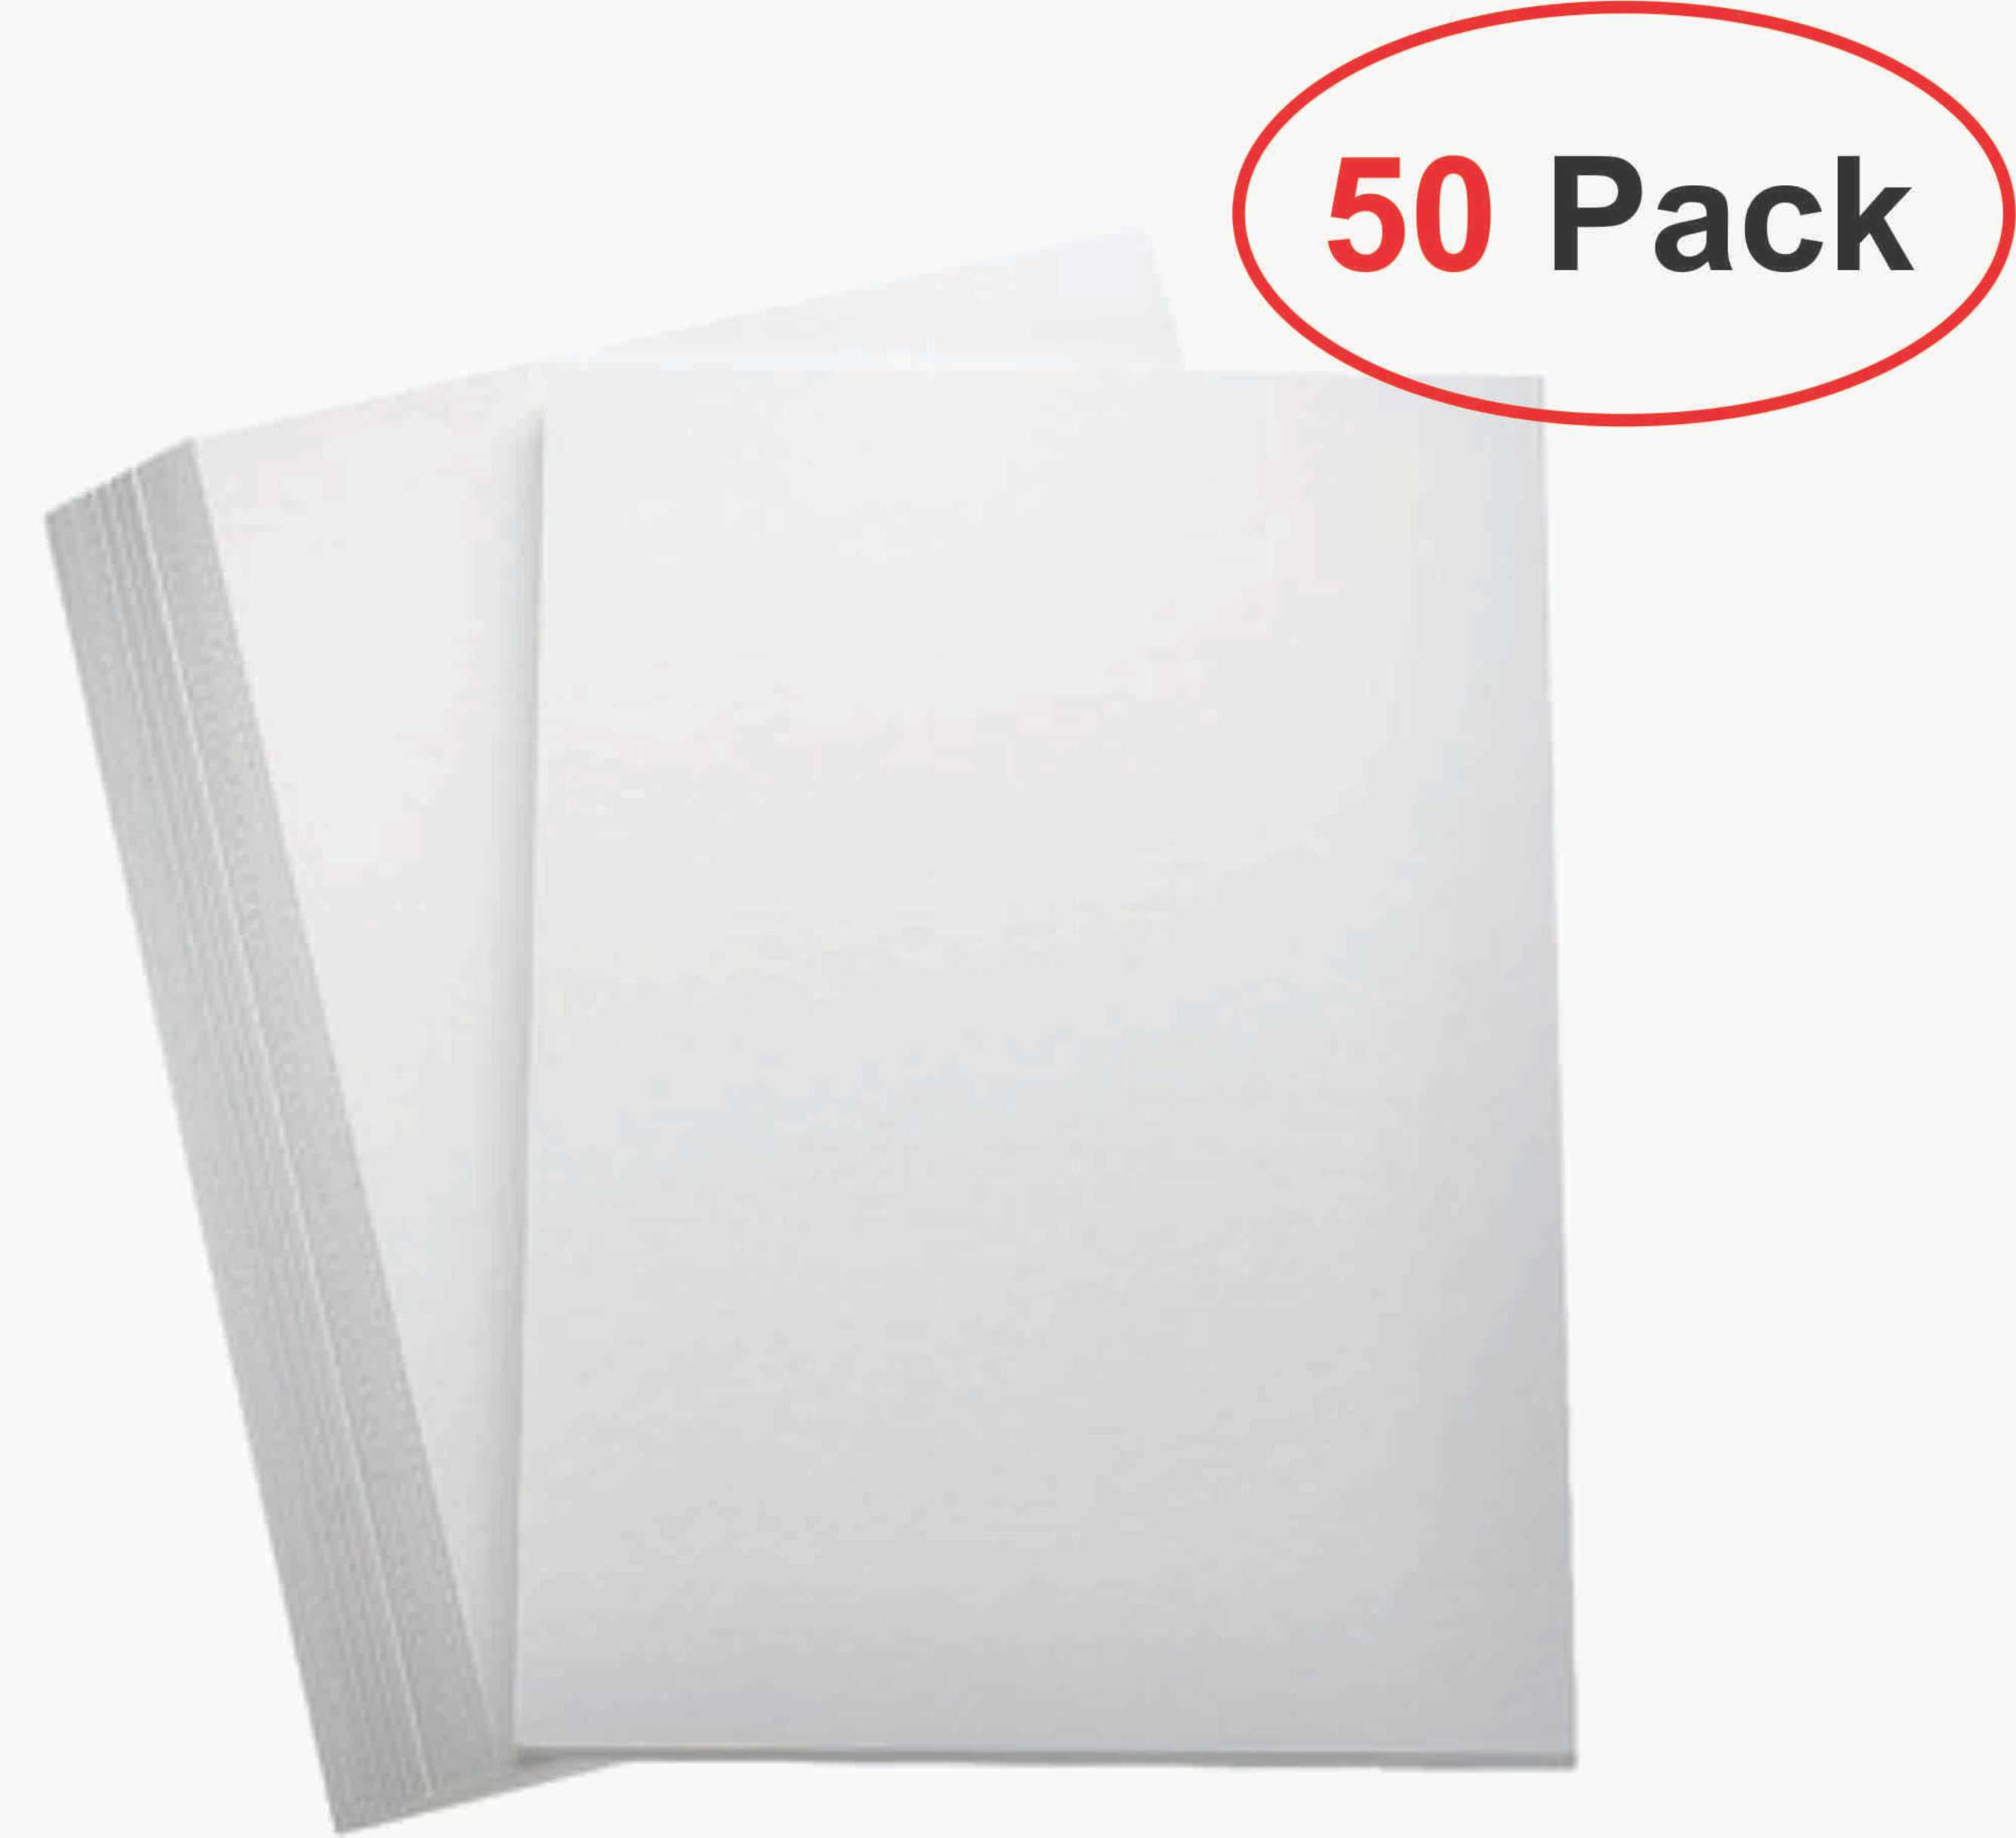 abha-envelope-size-a4-white-letter-size-envelopes-ideal-for-home-office